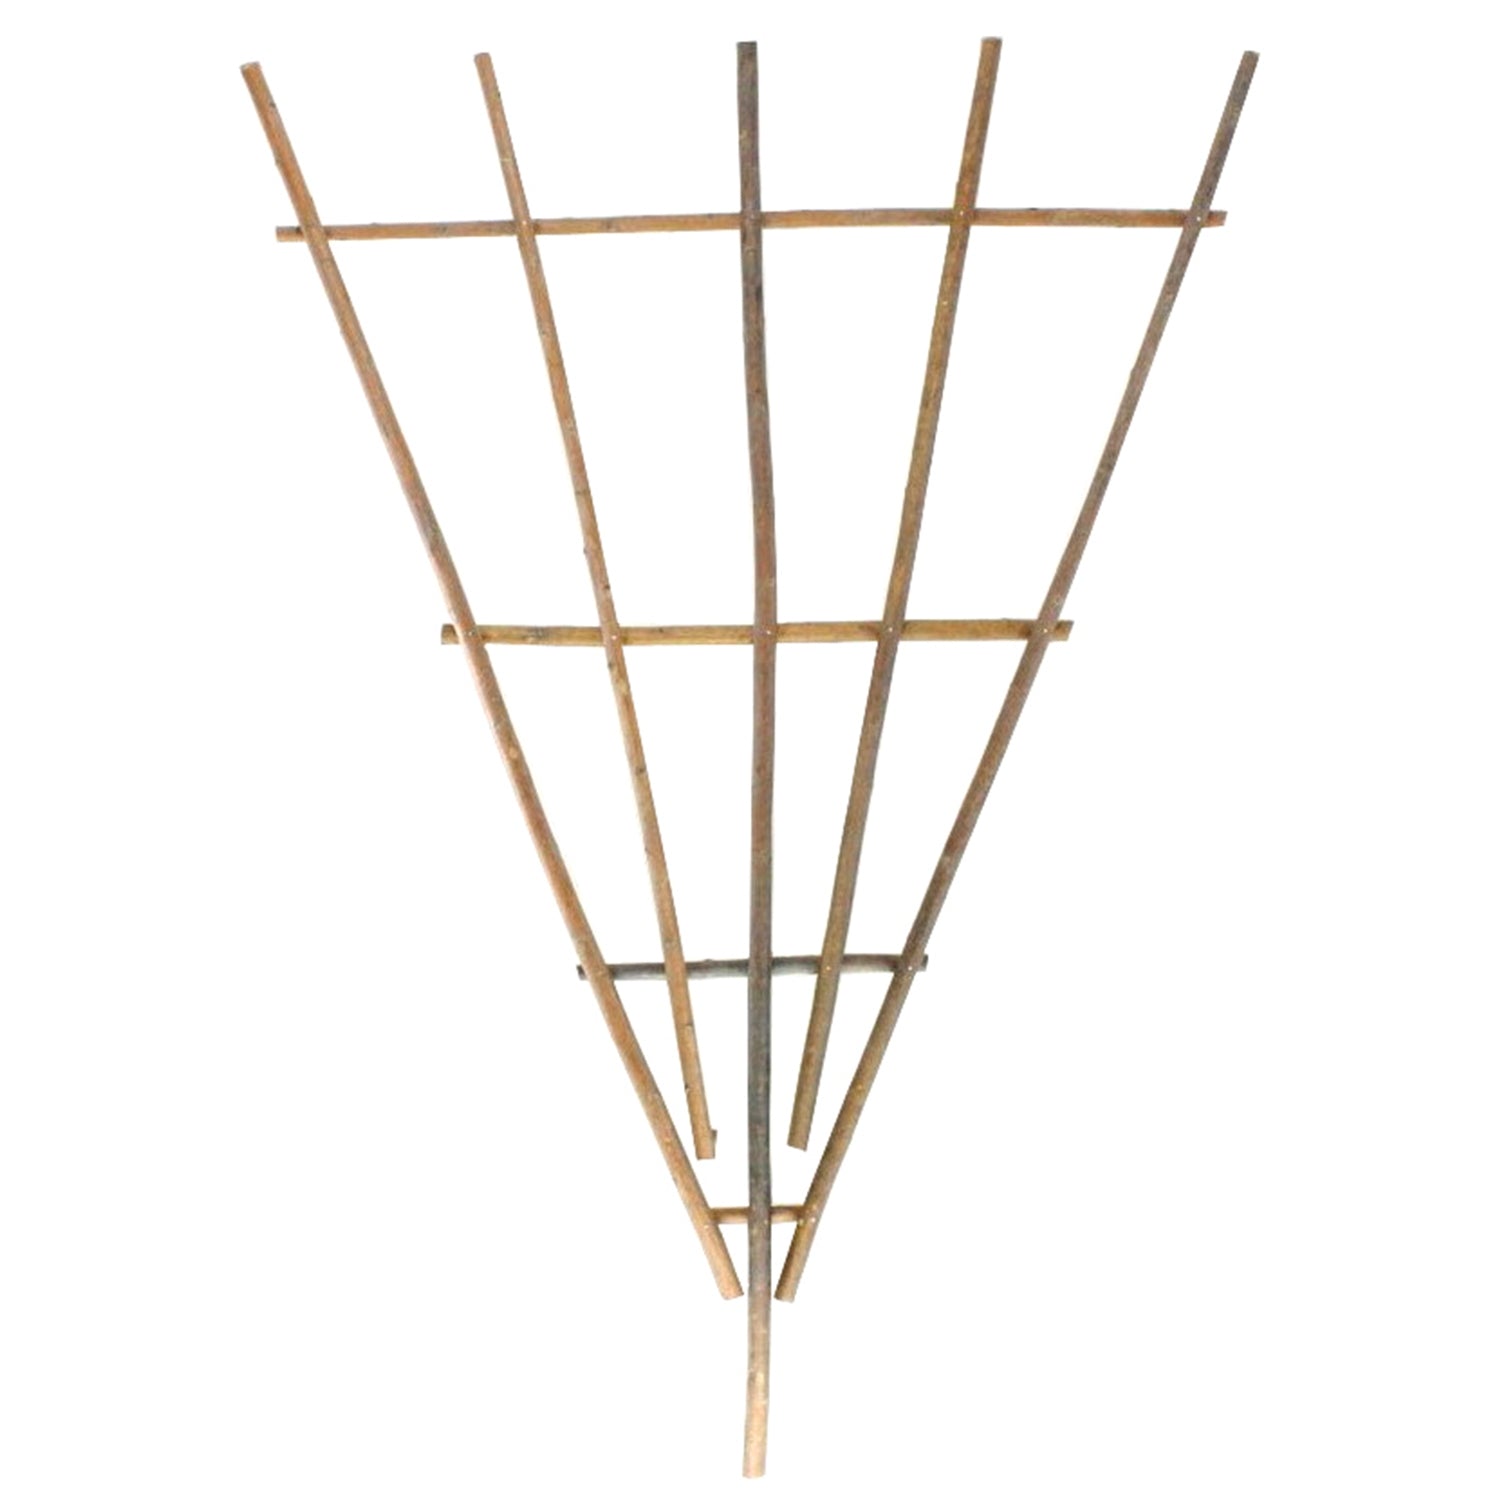 Staked Wooden Trellis' (Large)